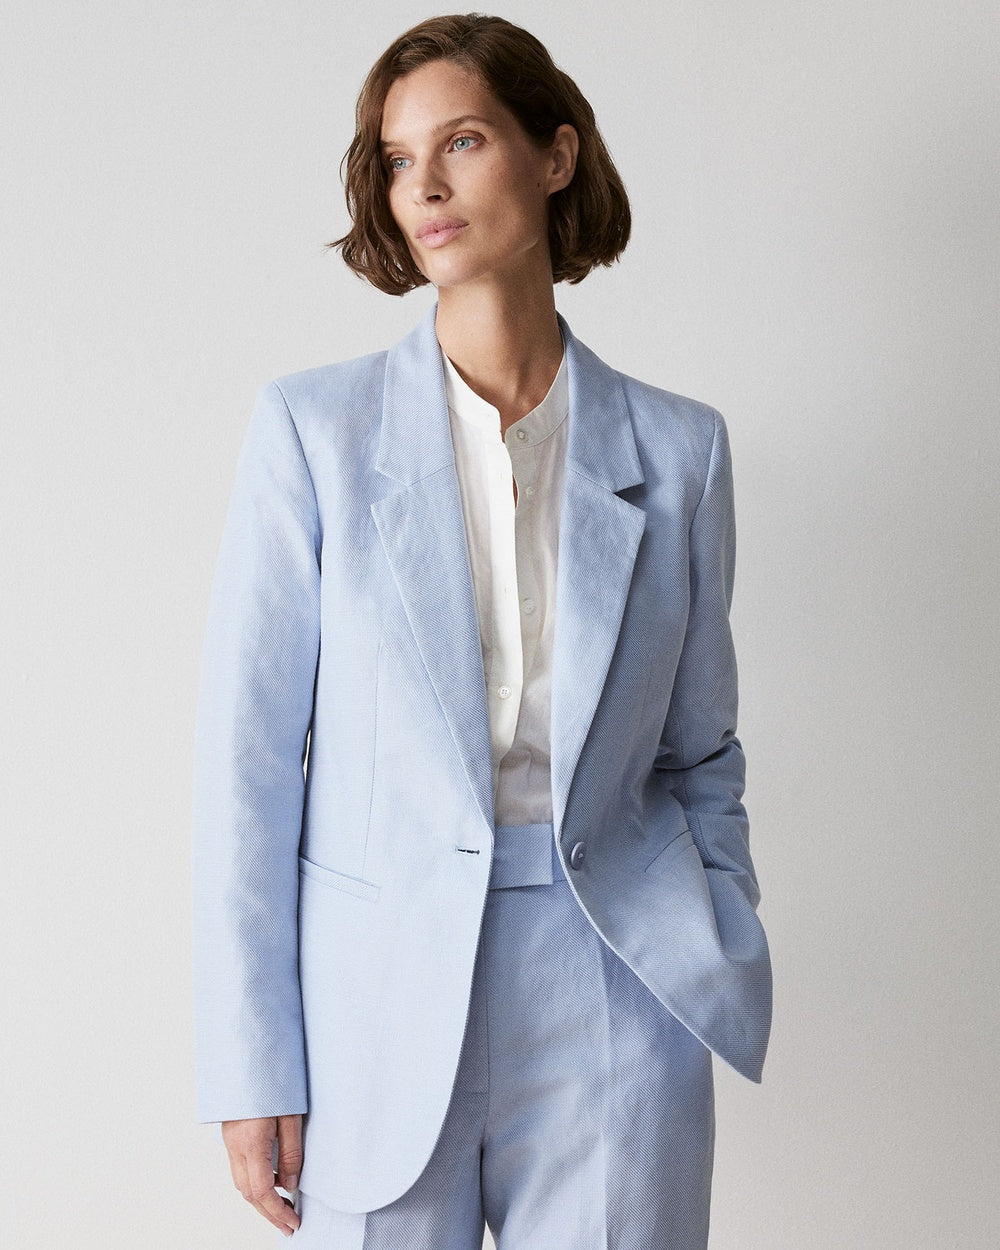 Linen and Cotton Blend Tie Wrap Blazer - great for the cooler months but still nice and breathable